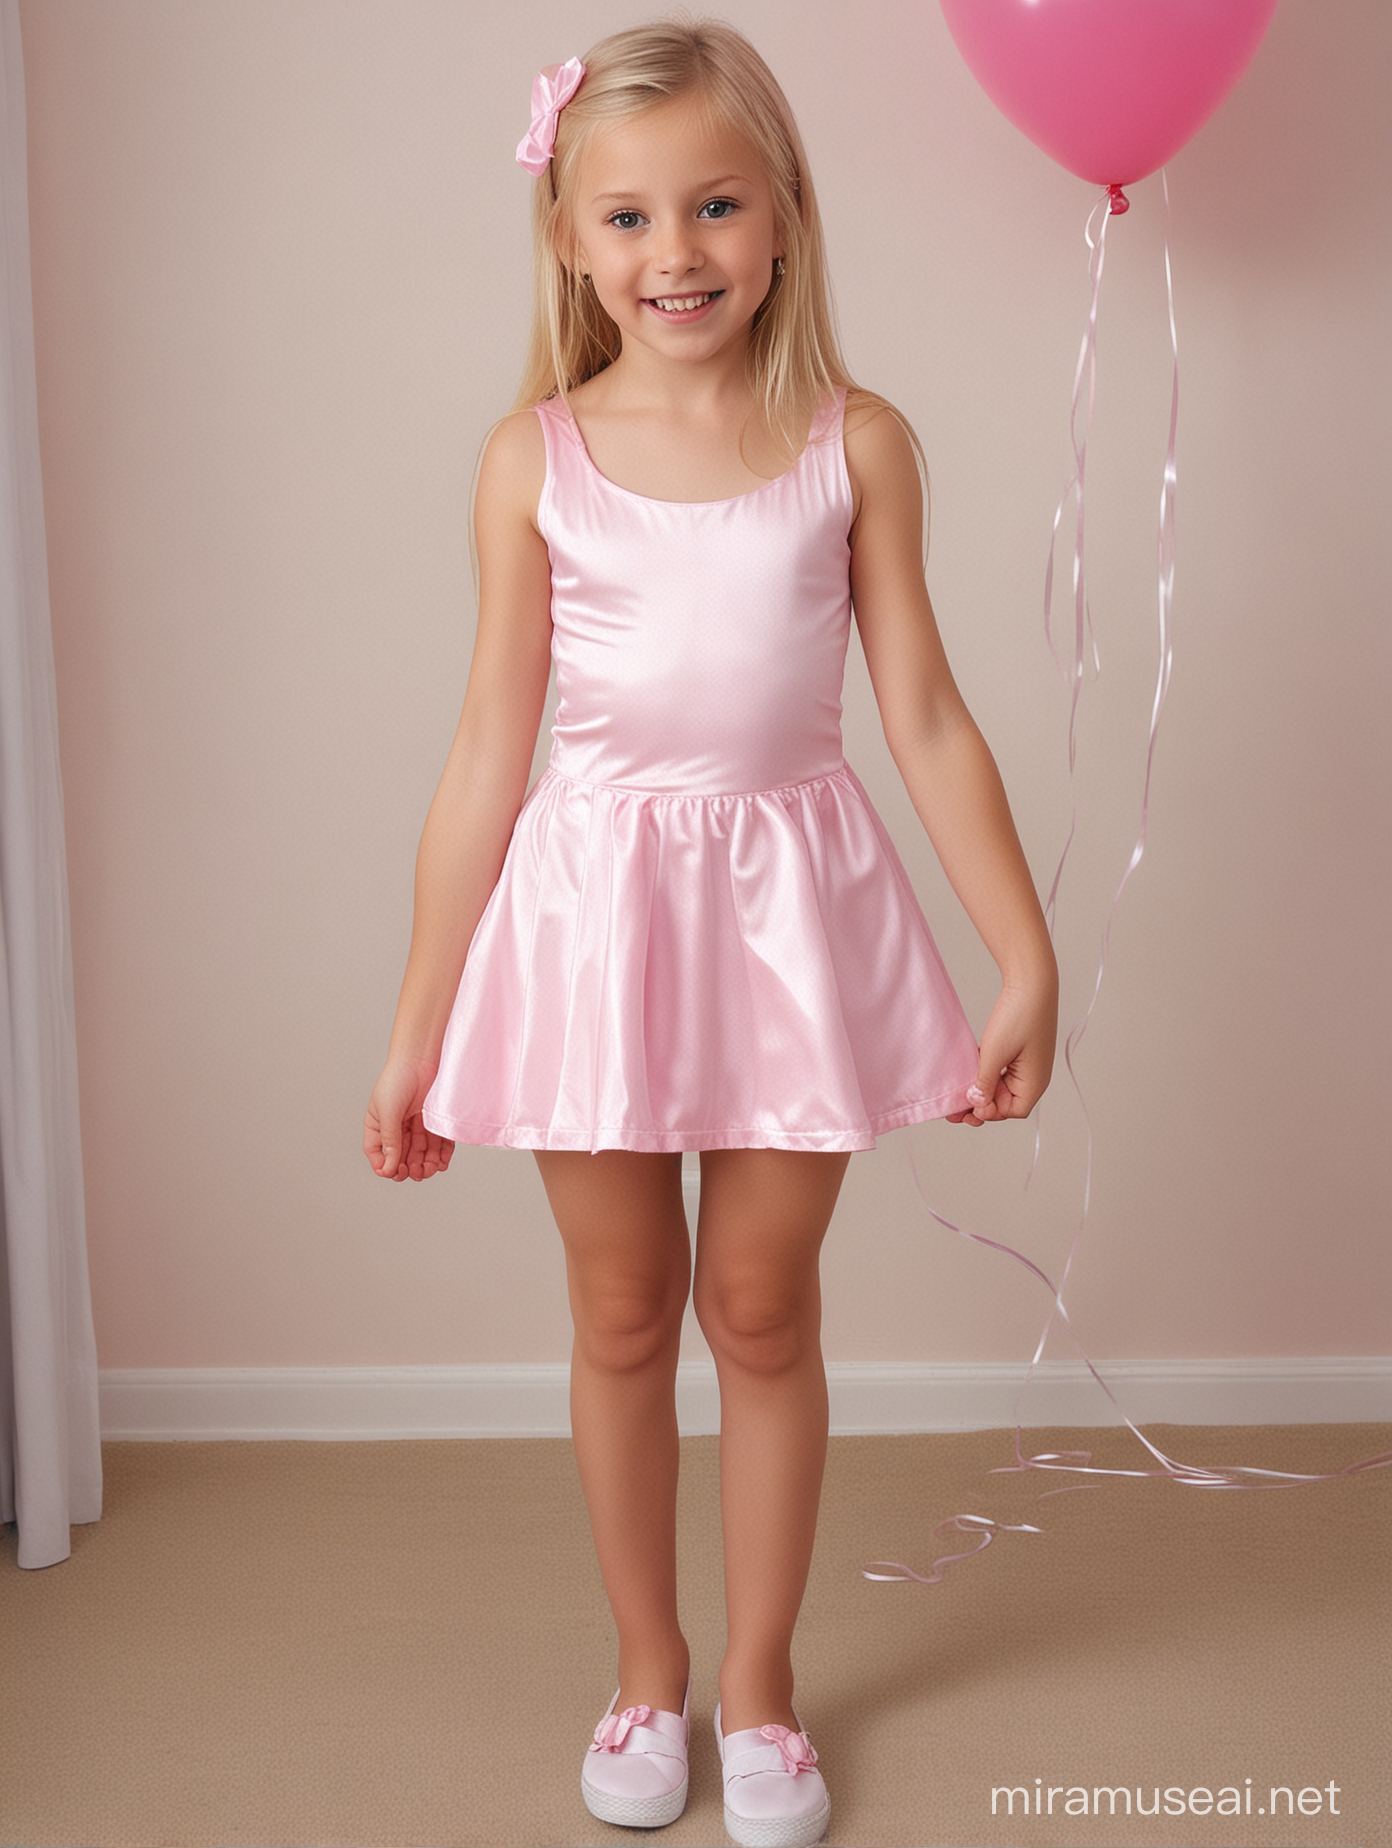 10 year old thin busty blonde girl in pink white tiny tight short party dress